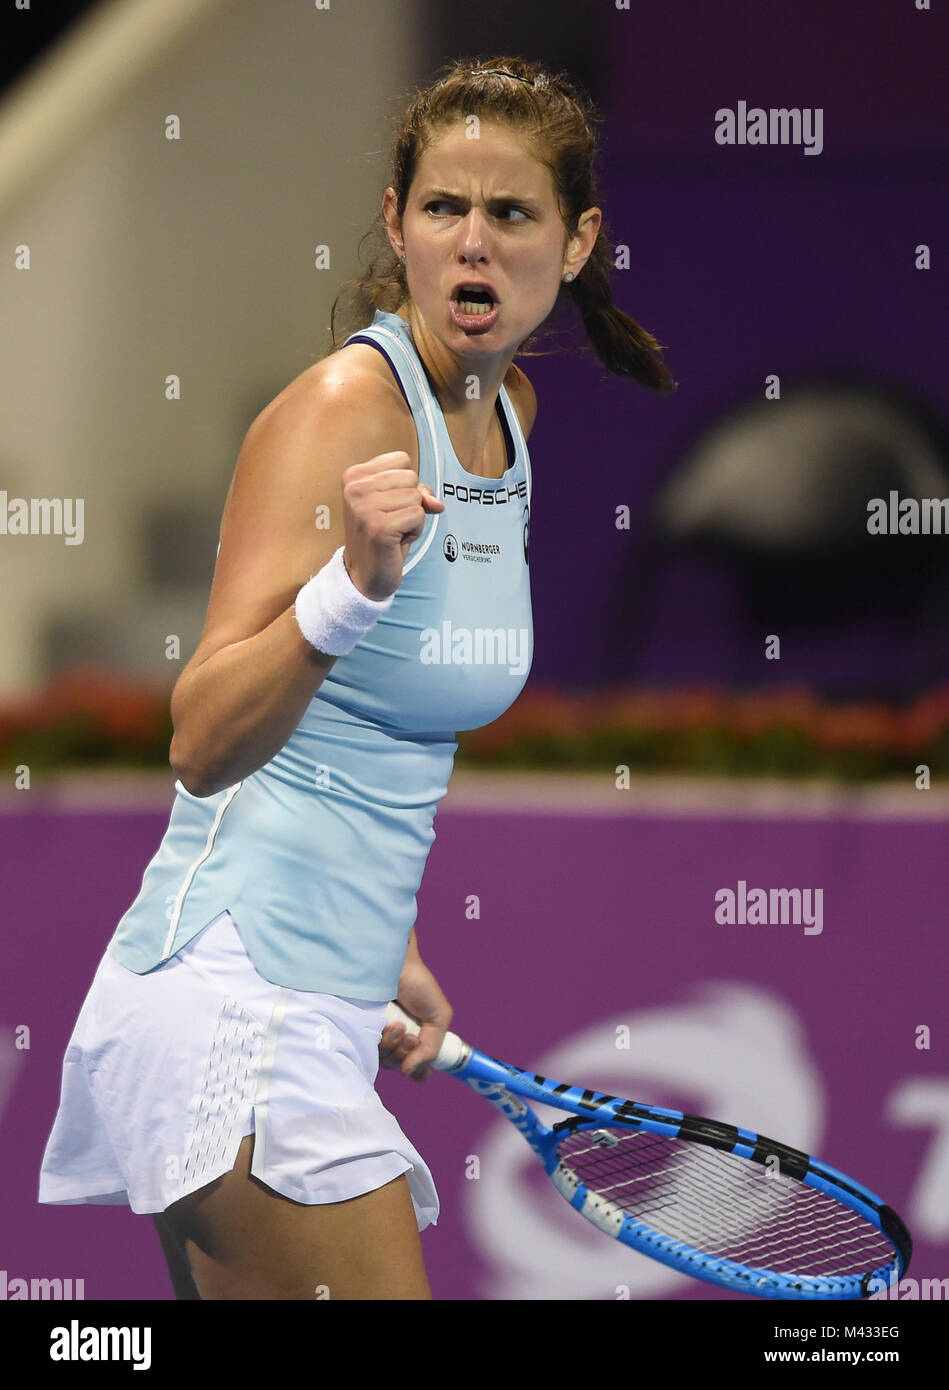 Doha, Qatar. 13th Feb, 2018. Julia Goerges of Germany celebrates during the single's first round match against Lucie Safarova of Czech Republic at the 2018 WTA Qatar Open in Doha, Qatar, on Feb. 13, 2018. Julia Goerges won 2-0. Credit: Nikku/Xinhua/Alamy Live News Stock Photo